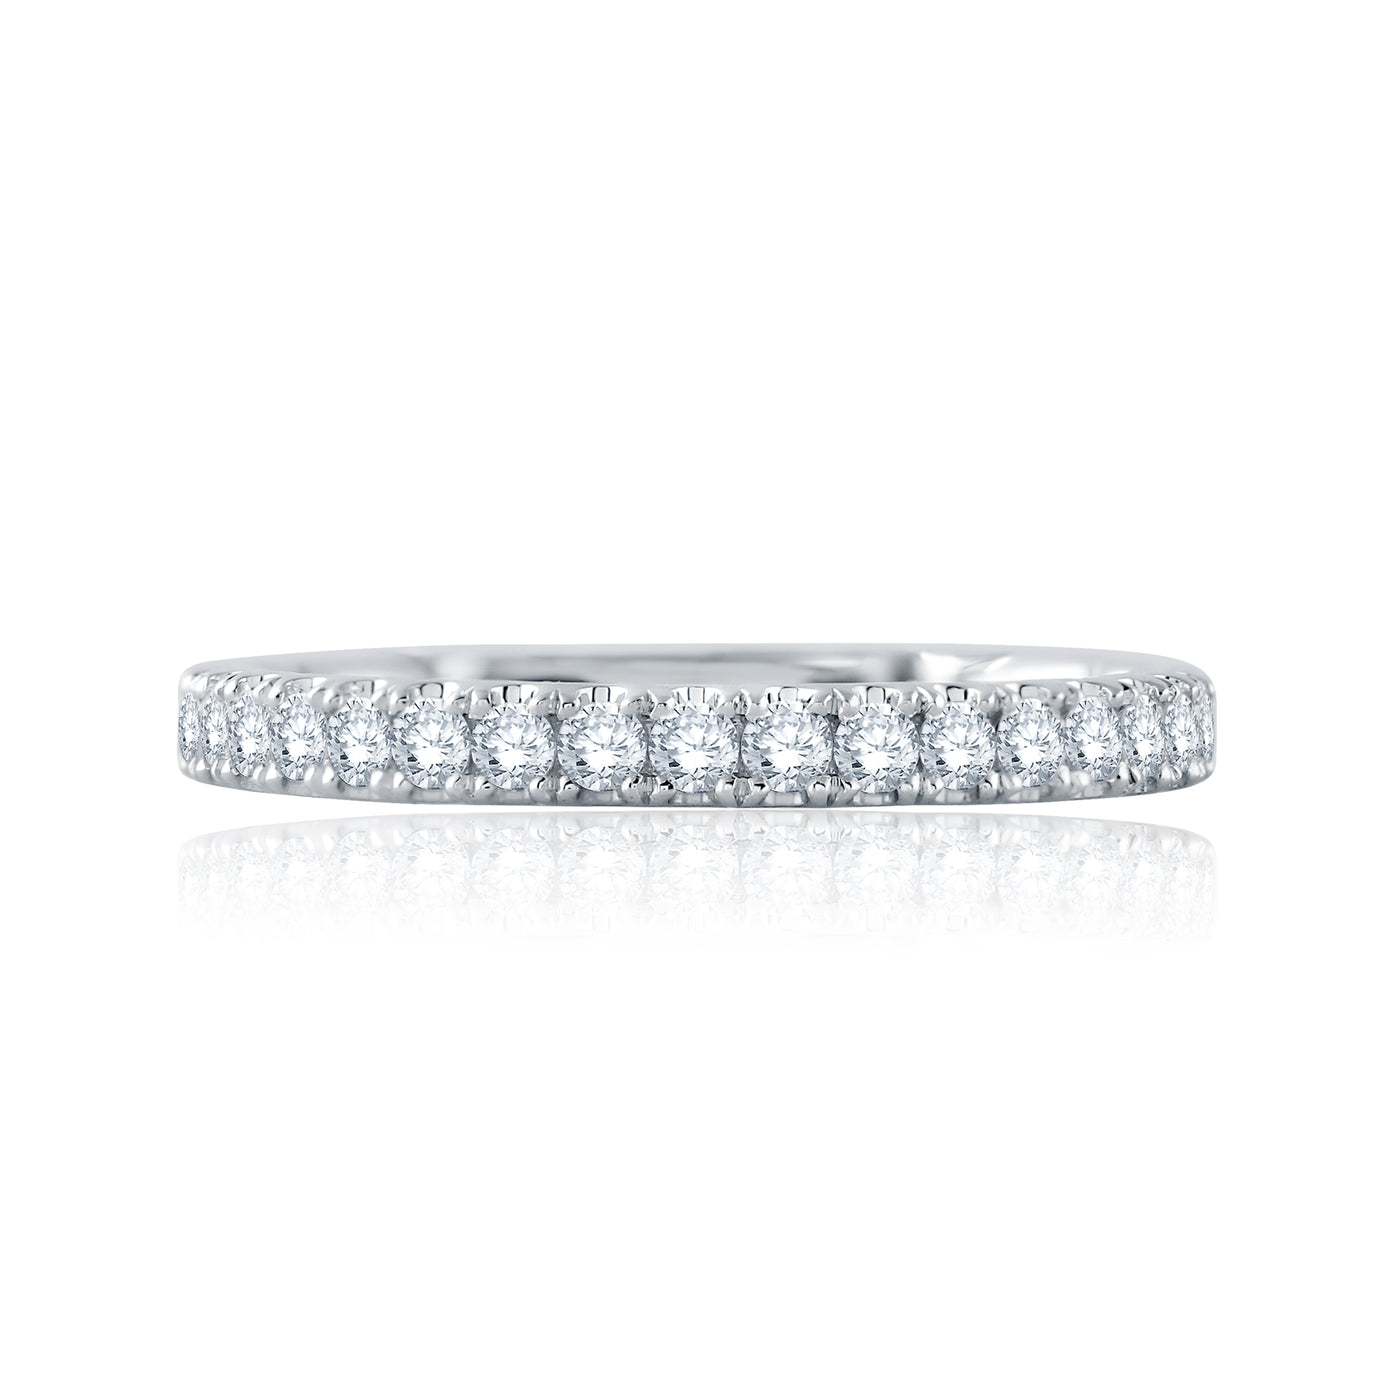 Three-Quarter Diamond Pave Wedding Band with Quilted Interior